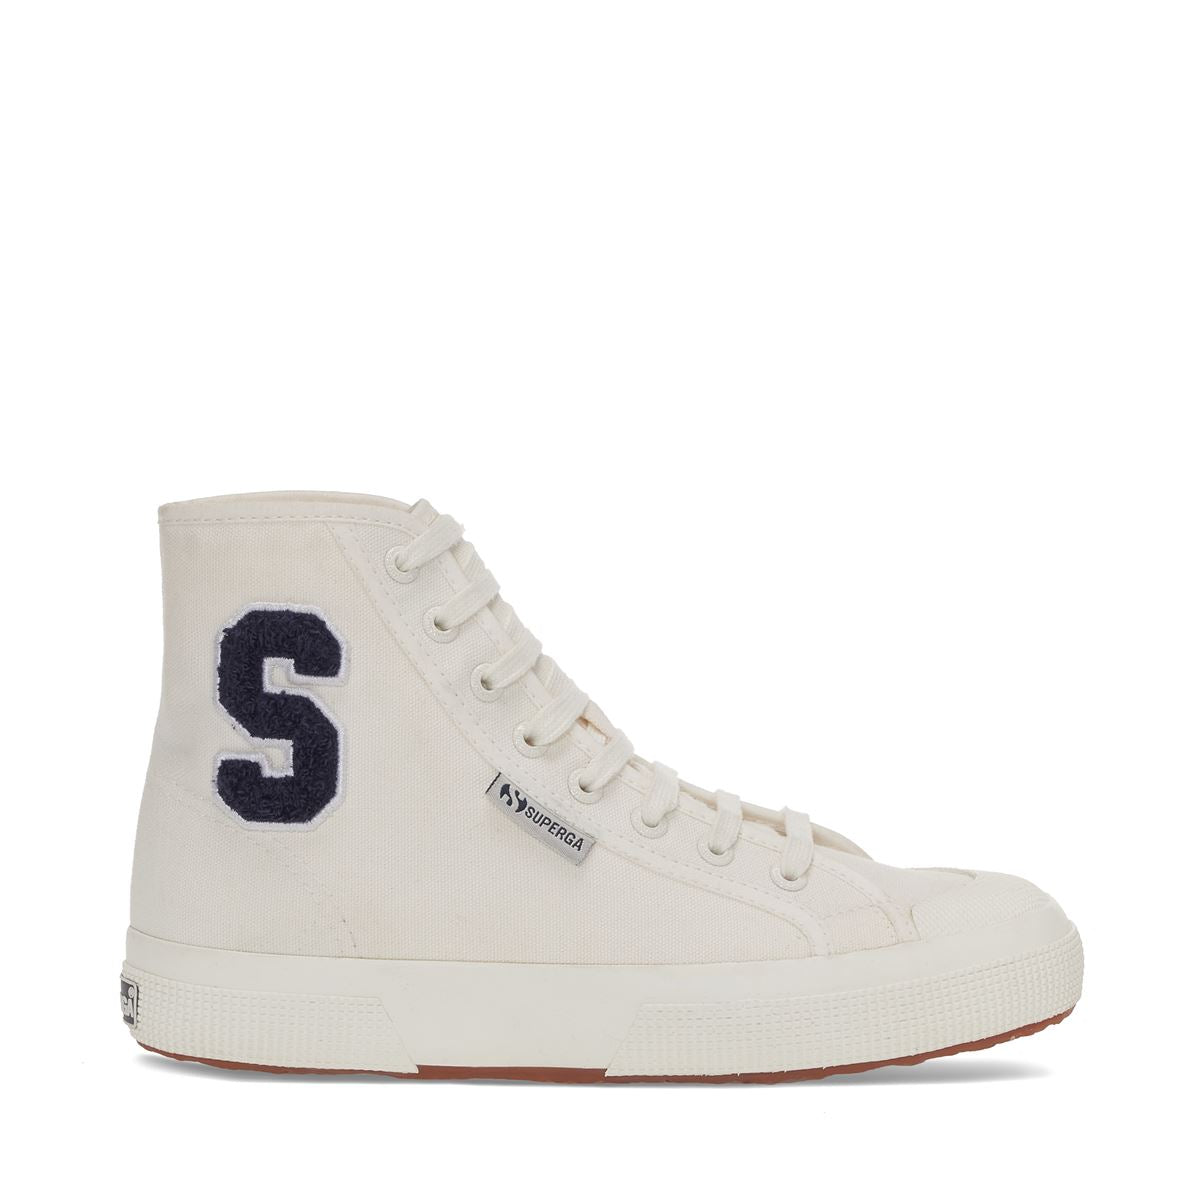 Superga 2295 Cotton Terry Patch Sneakers - White Avorio Navy. Side view.